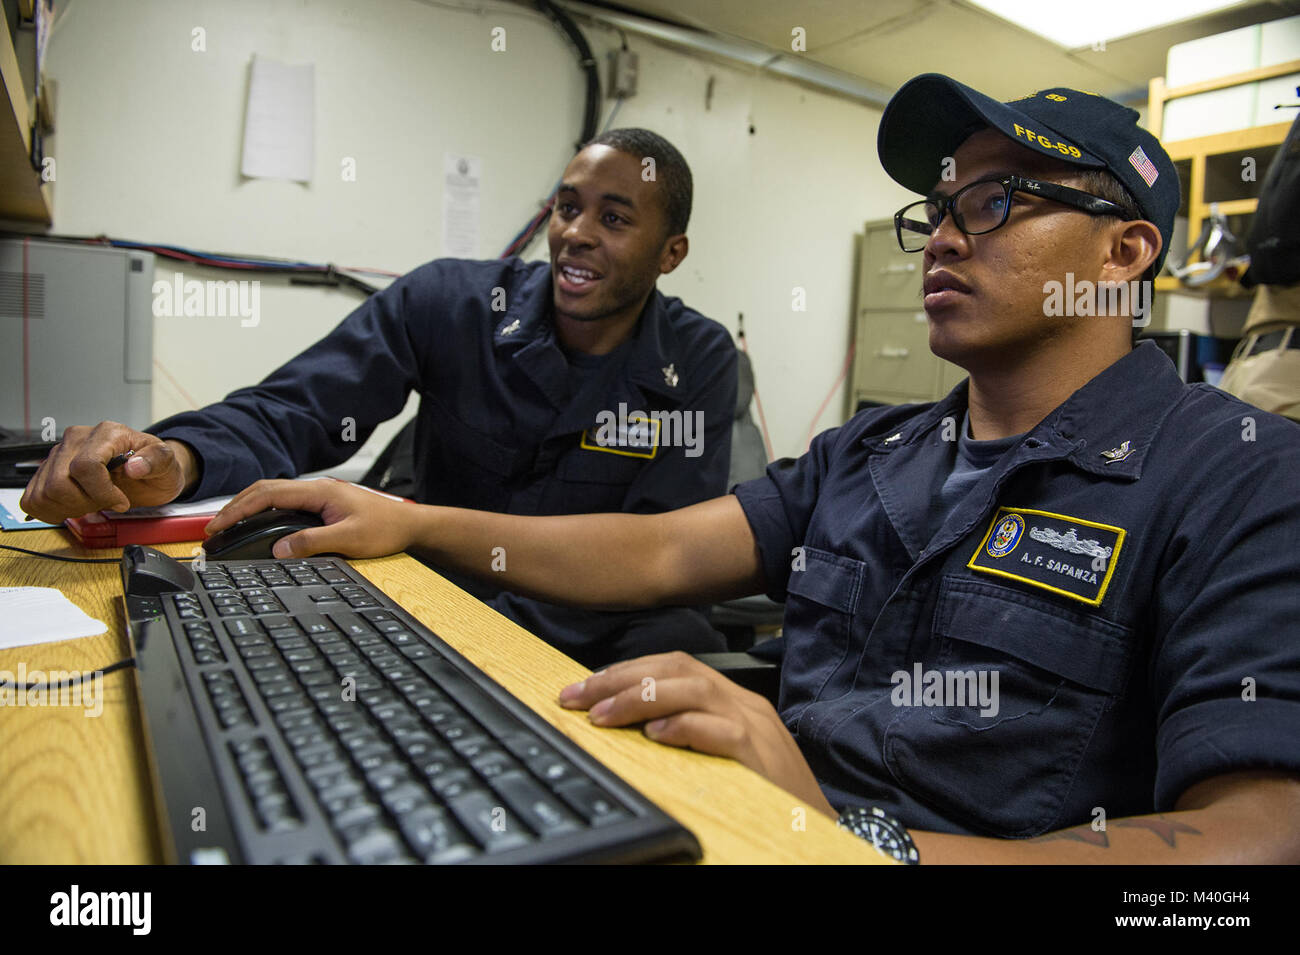 150205-N-IG780-762 CARIBBEAN SEA (Feb. 5, 2015) — Personal Specialist 1st Class George Martin, left, trains Personnel Specialist 3rd Class Anthony Sapanza Jr. on how to use the Personnel Tempo program on board guided-missile frigate USS Kauffman (FFG 59). Kauffman is currently underway in support of Operation Martillo, a joint operation with the U.S. Coast Guard and partner nations within the 4th Fleet area of responsibility. (U.S. Navy photo by Mass Communication Specialist 3rd Class Shane A. Jackson/Released) 150205-N-IG780-762 Stock Photo